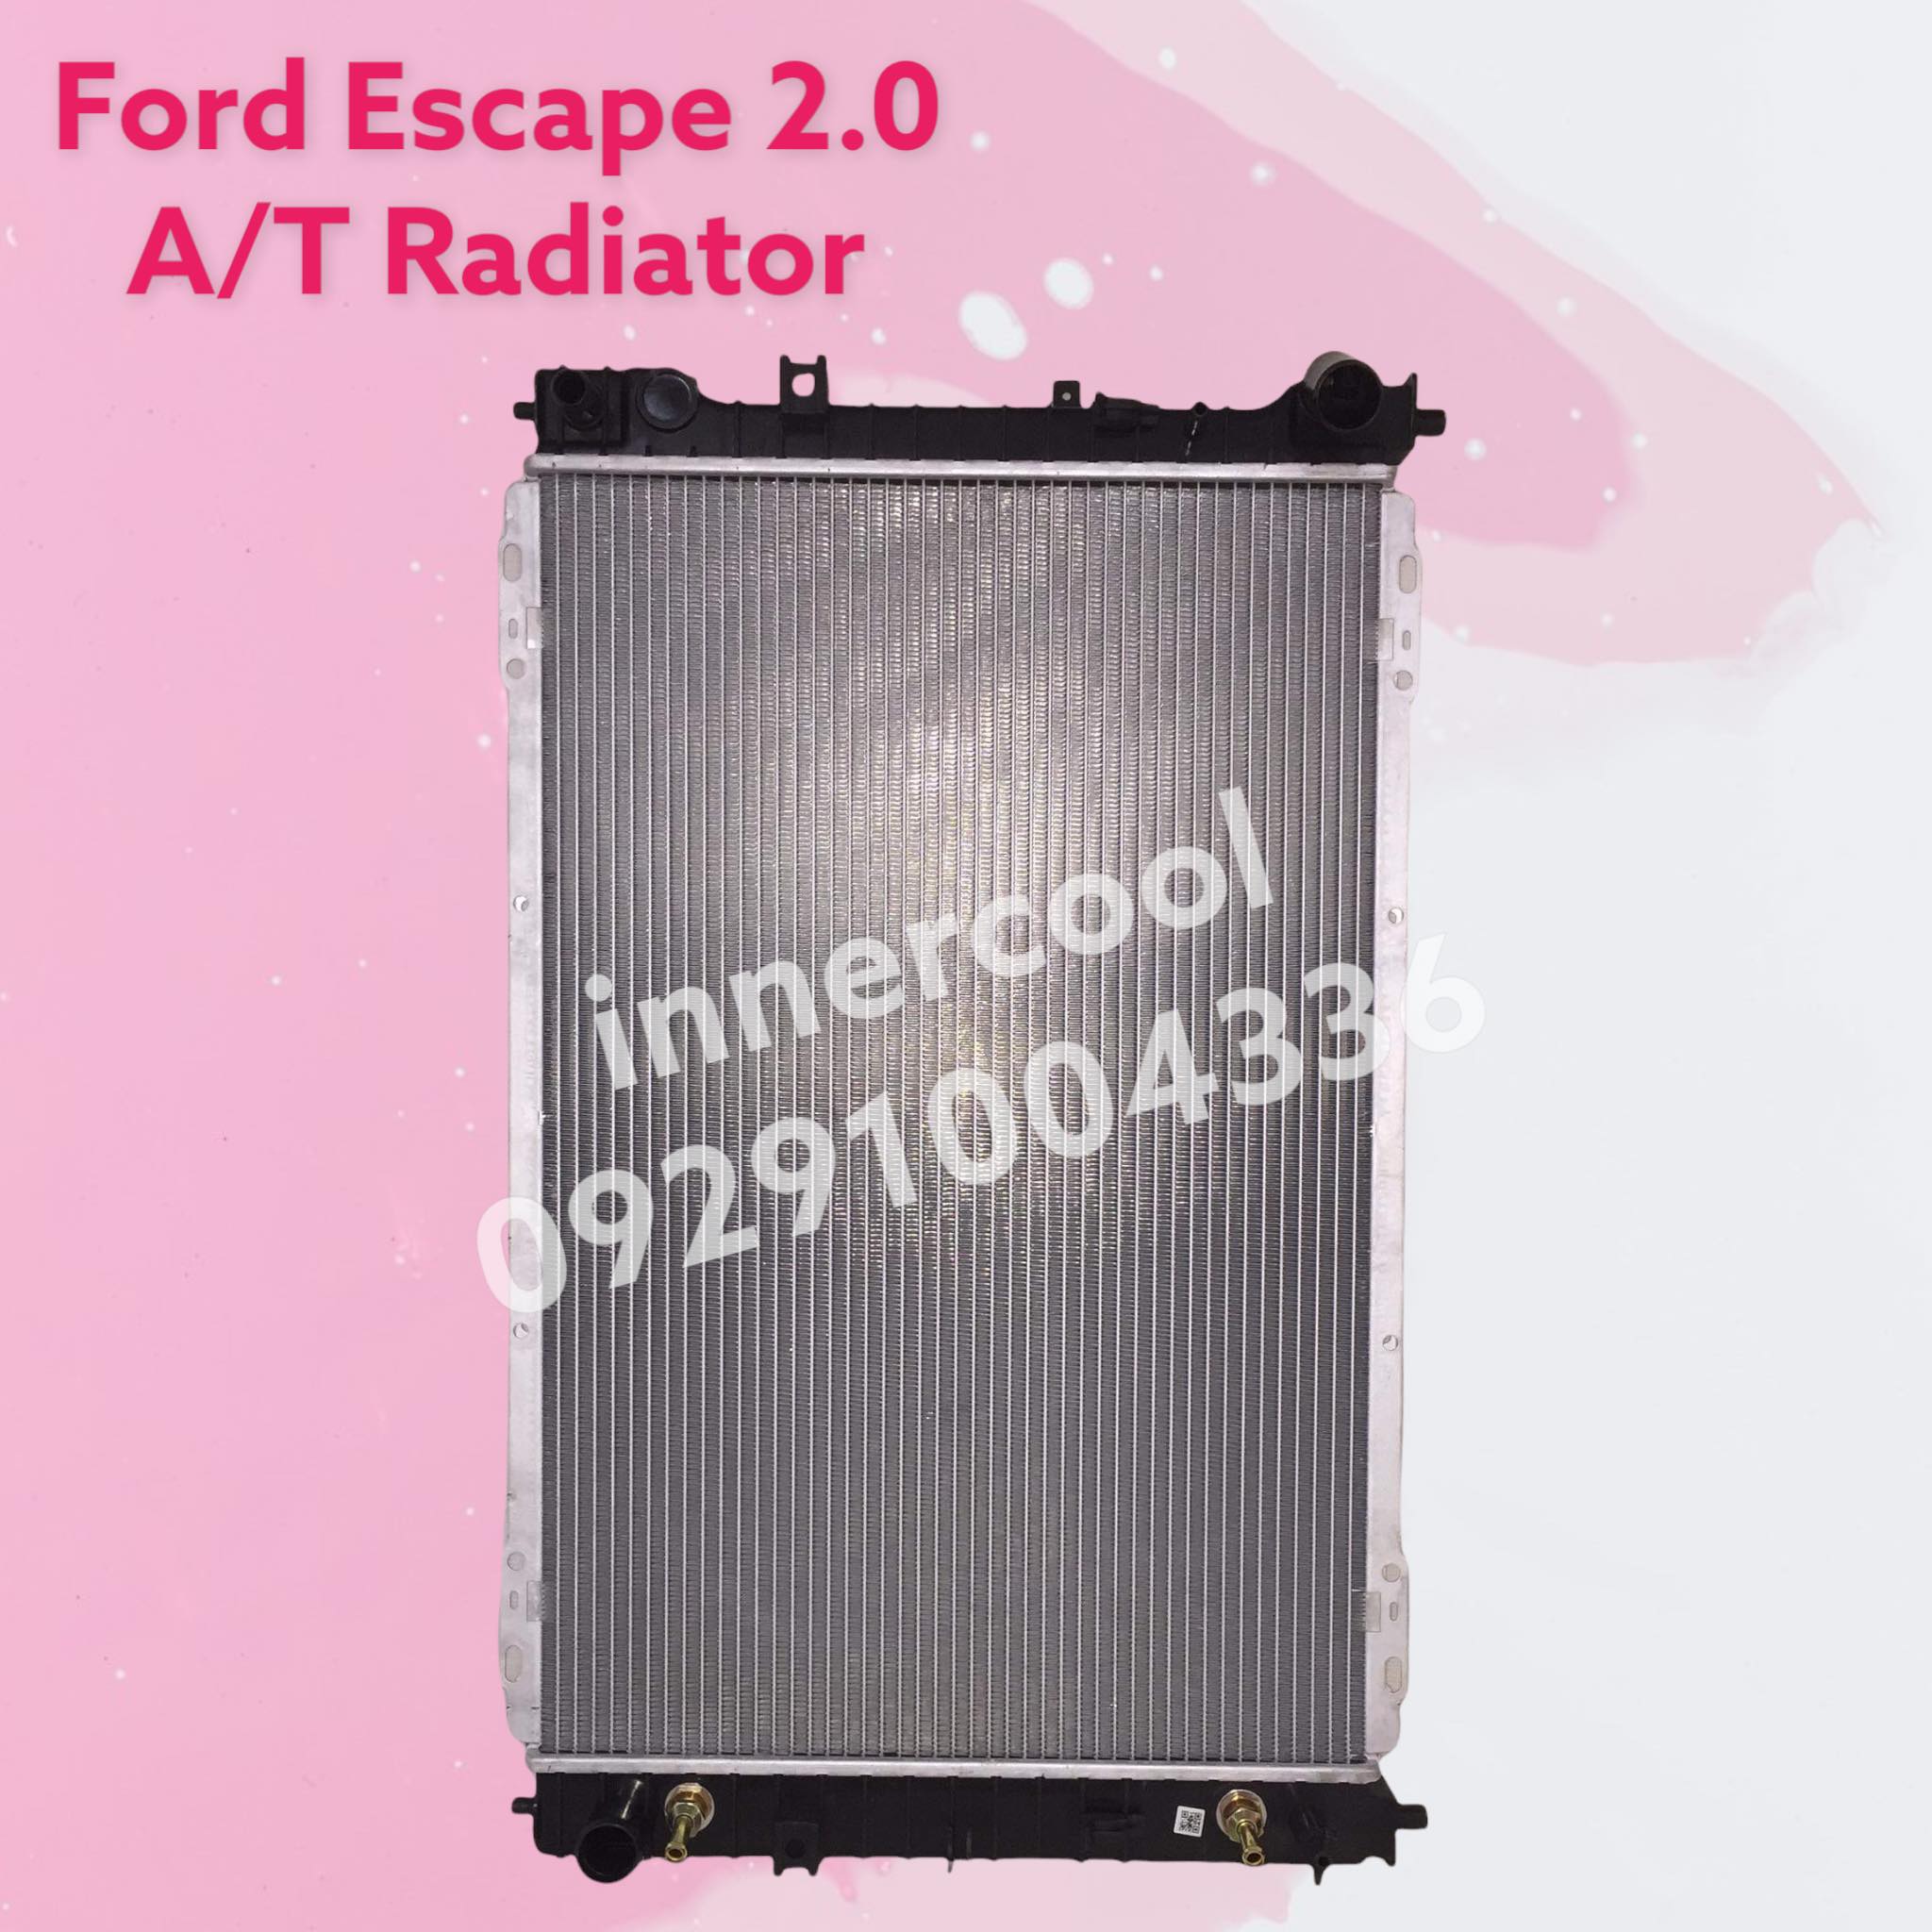 Sunbelt Radiator And Condenser Fan For Ford Escape Mercury Mariner FO3115176 Drop in Fitment 